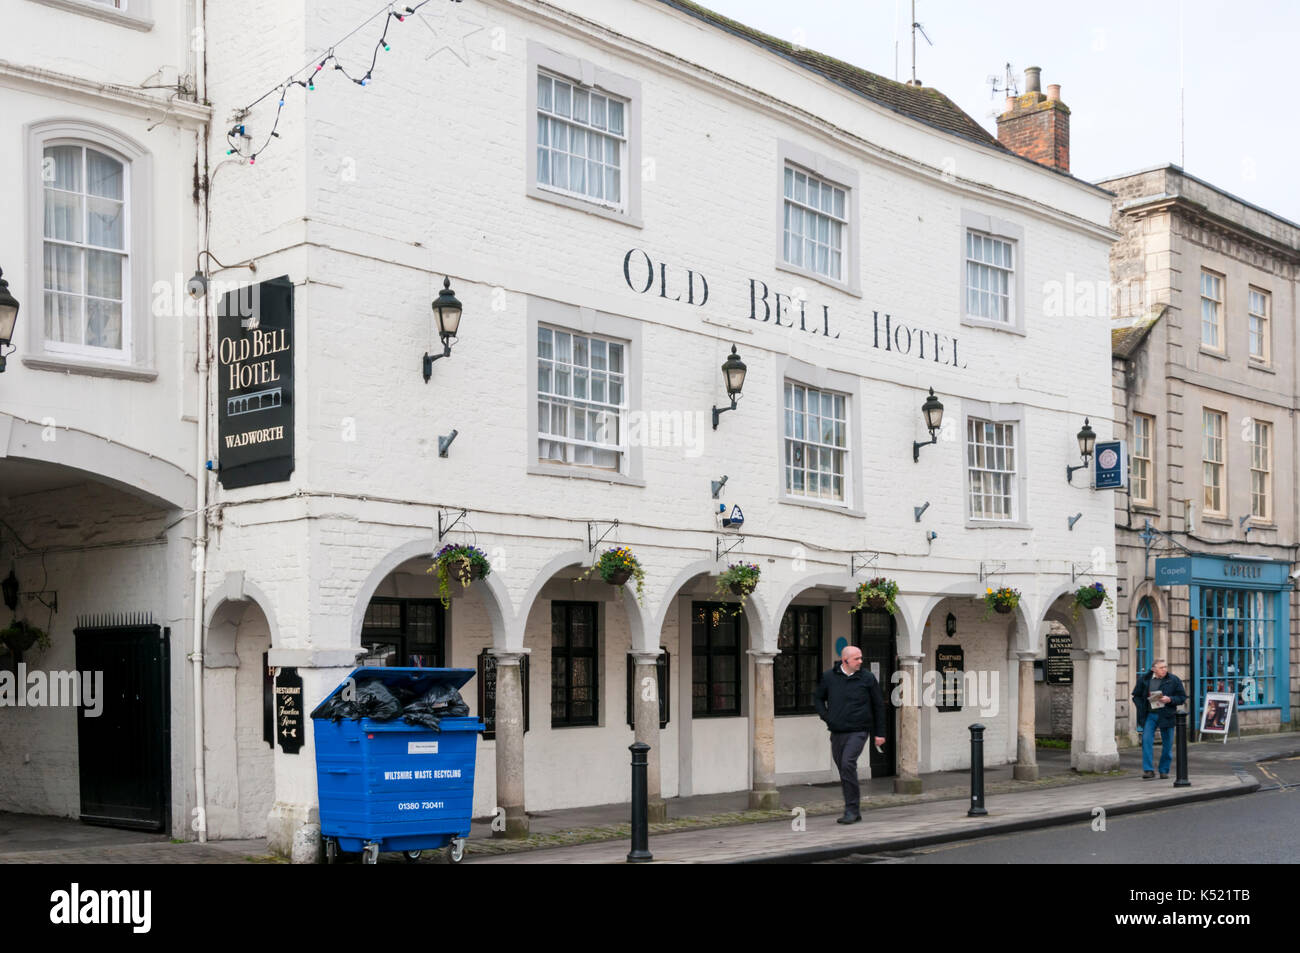 The Old Bell Hotel, a coaching inn dating back to the 15th century, in Warminster, Wiltshire. Stock Photo